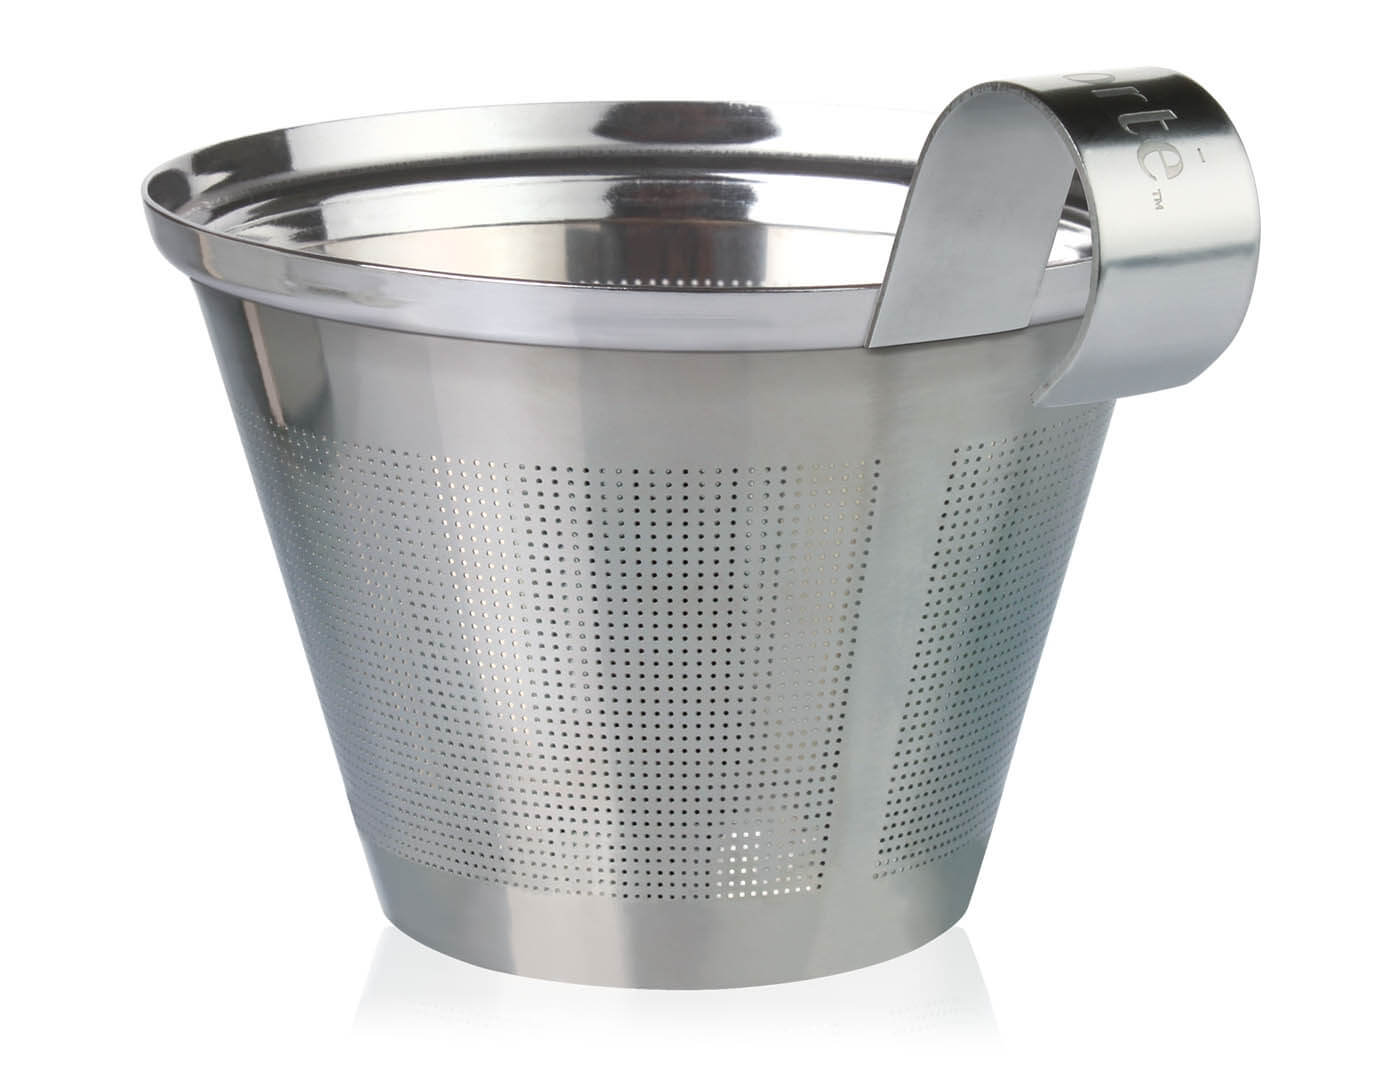 Stainless steel infuser basket for Kati Steeping Cup